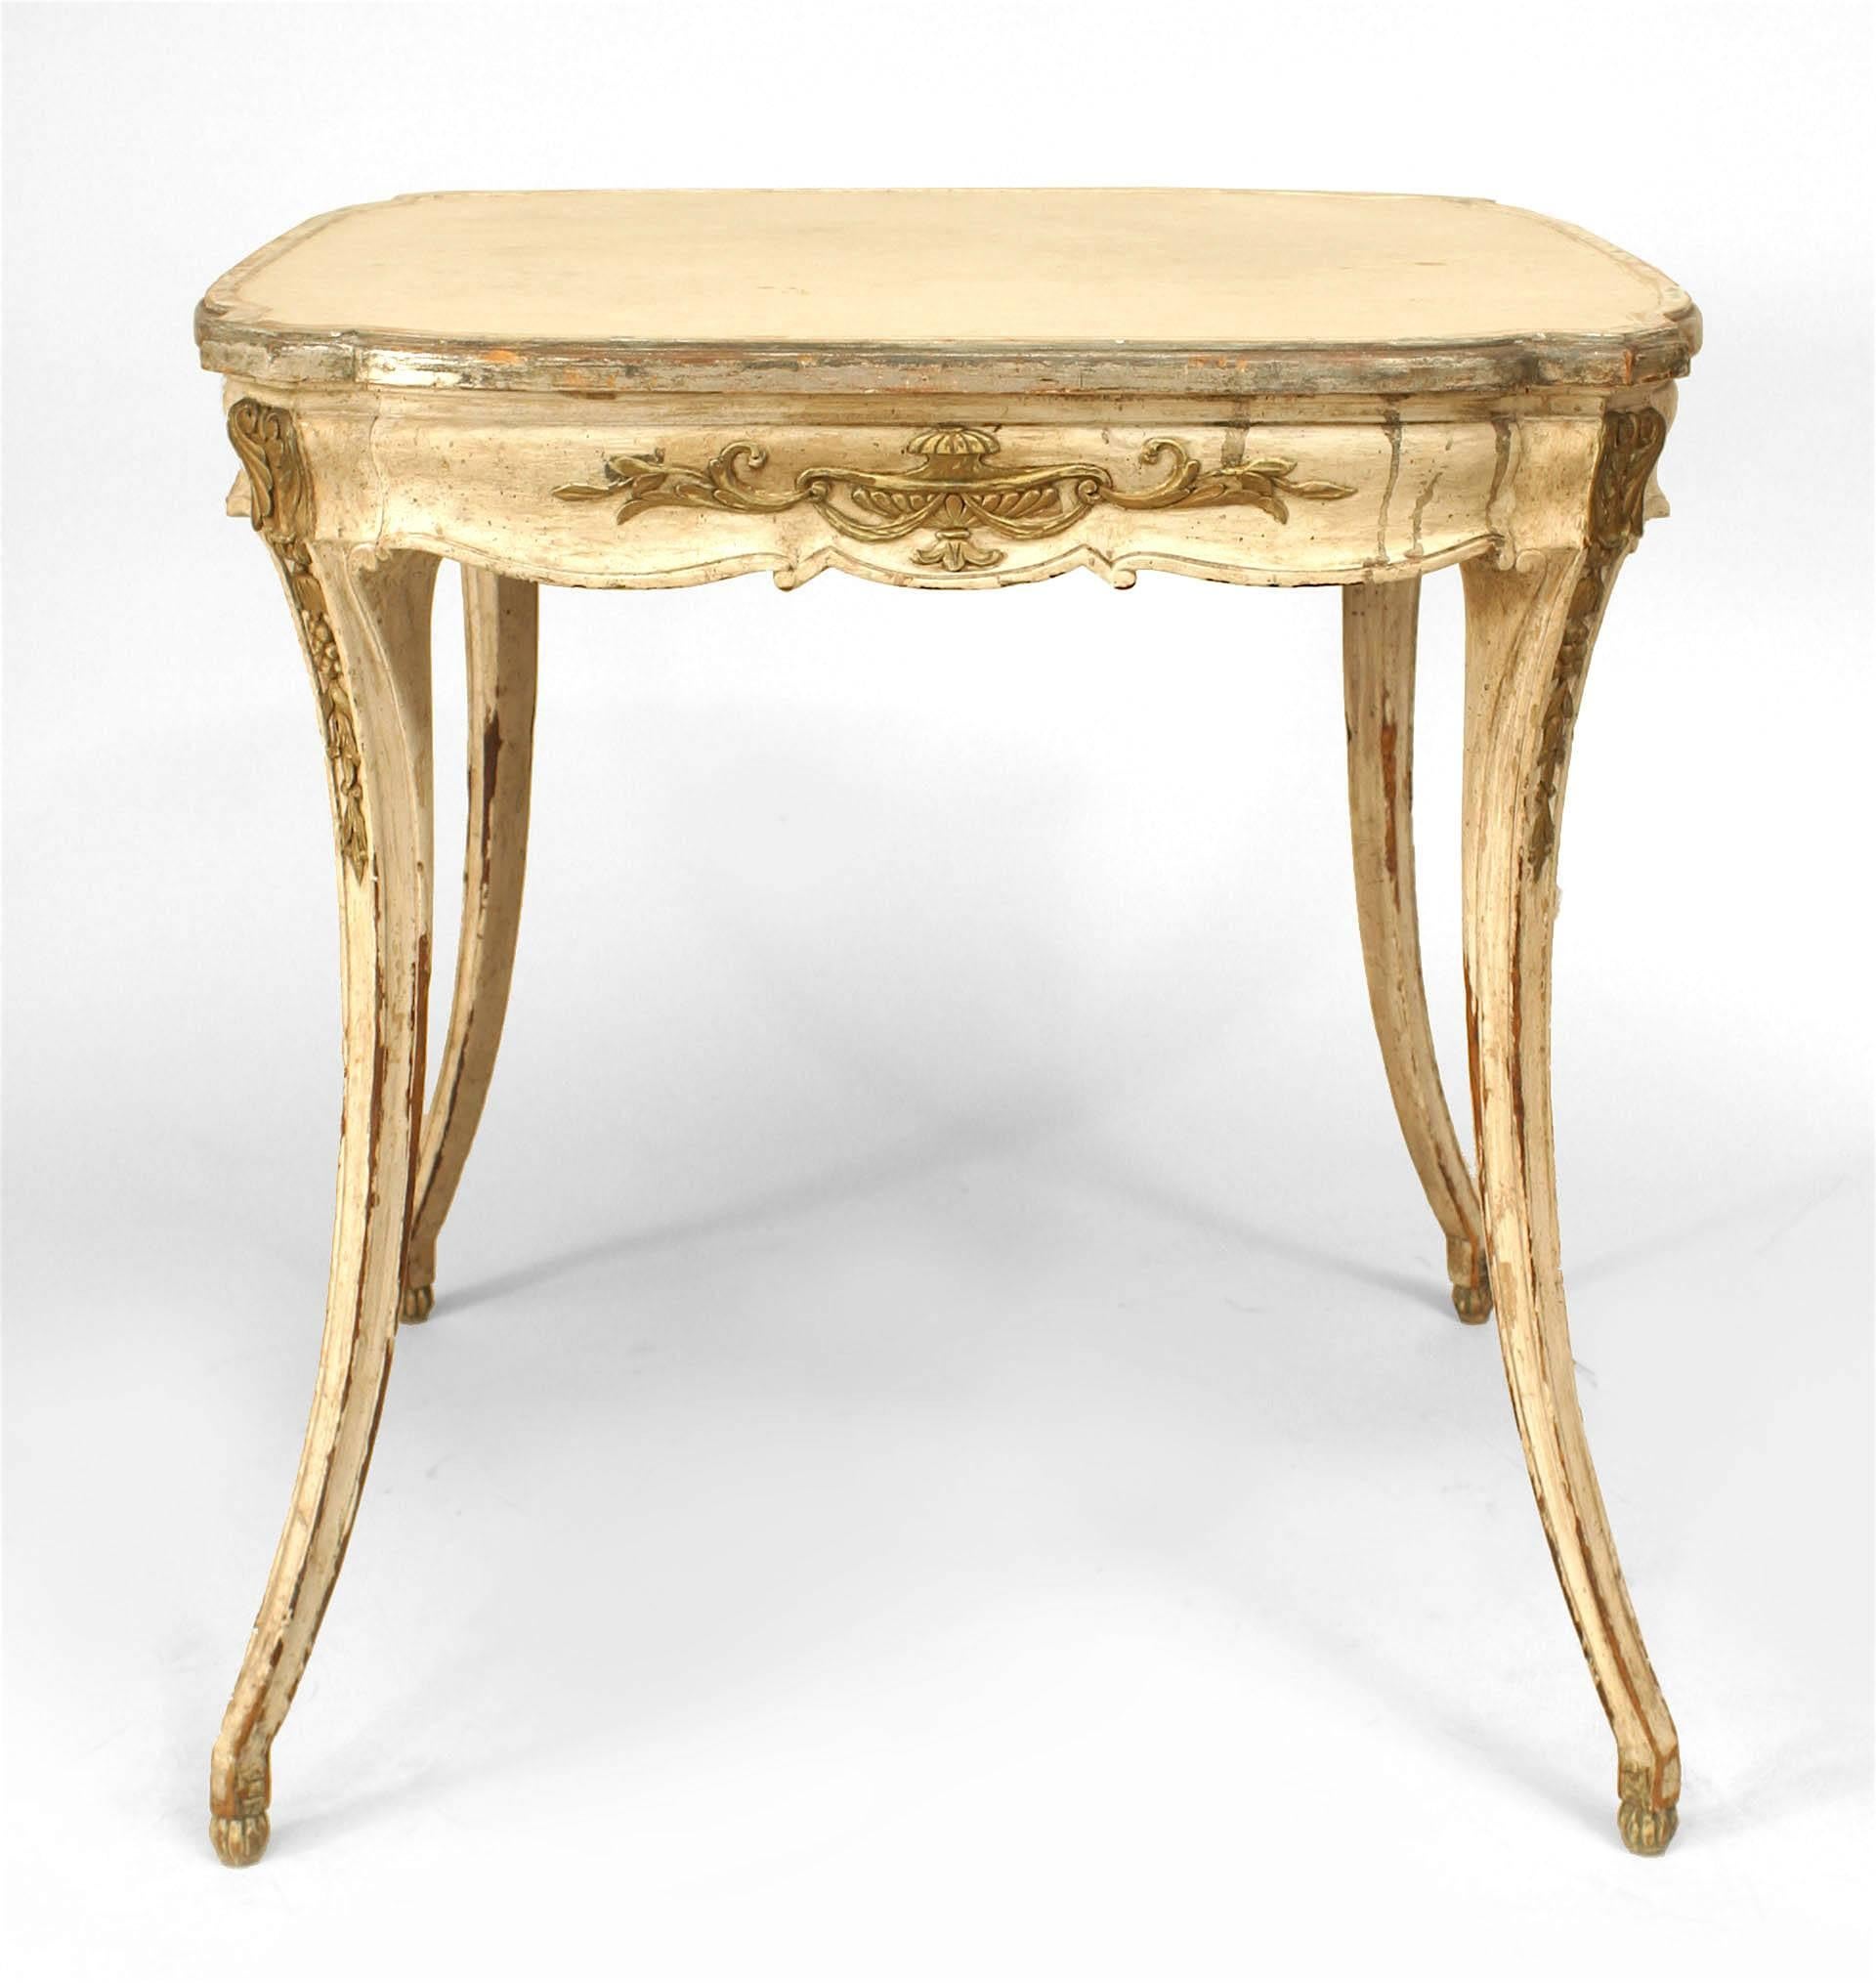 Neoclassical Italian Neoclassic Style Silver Gilt End Table